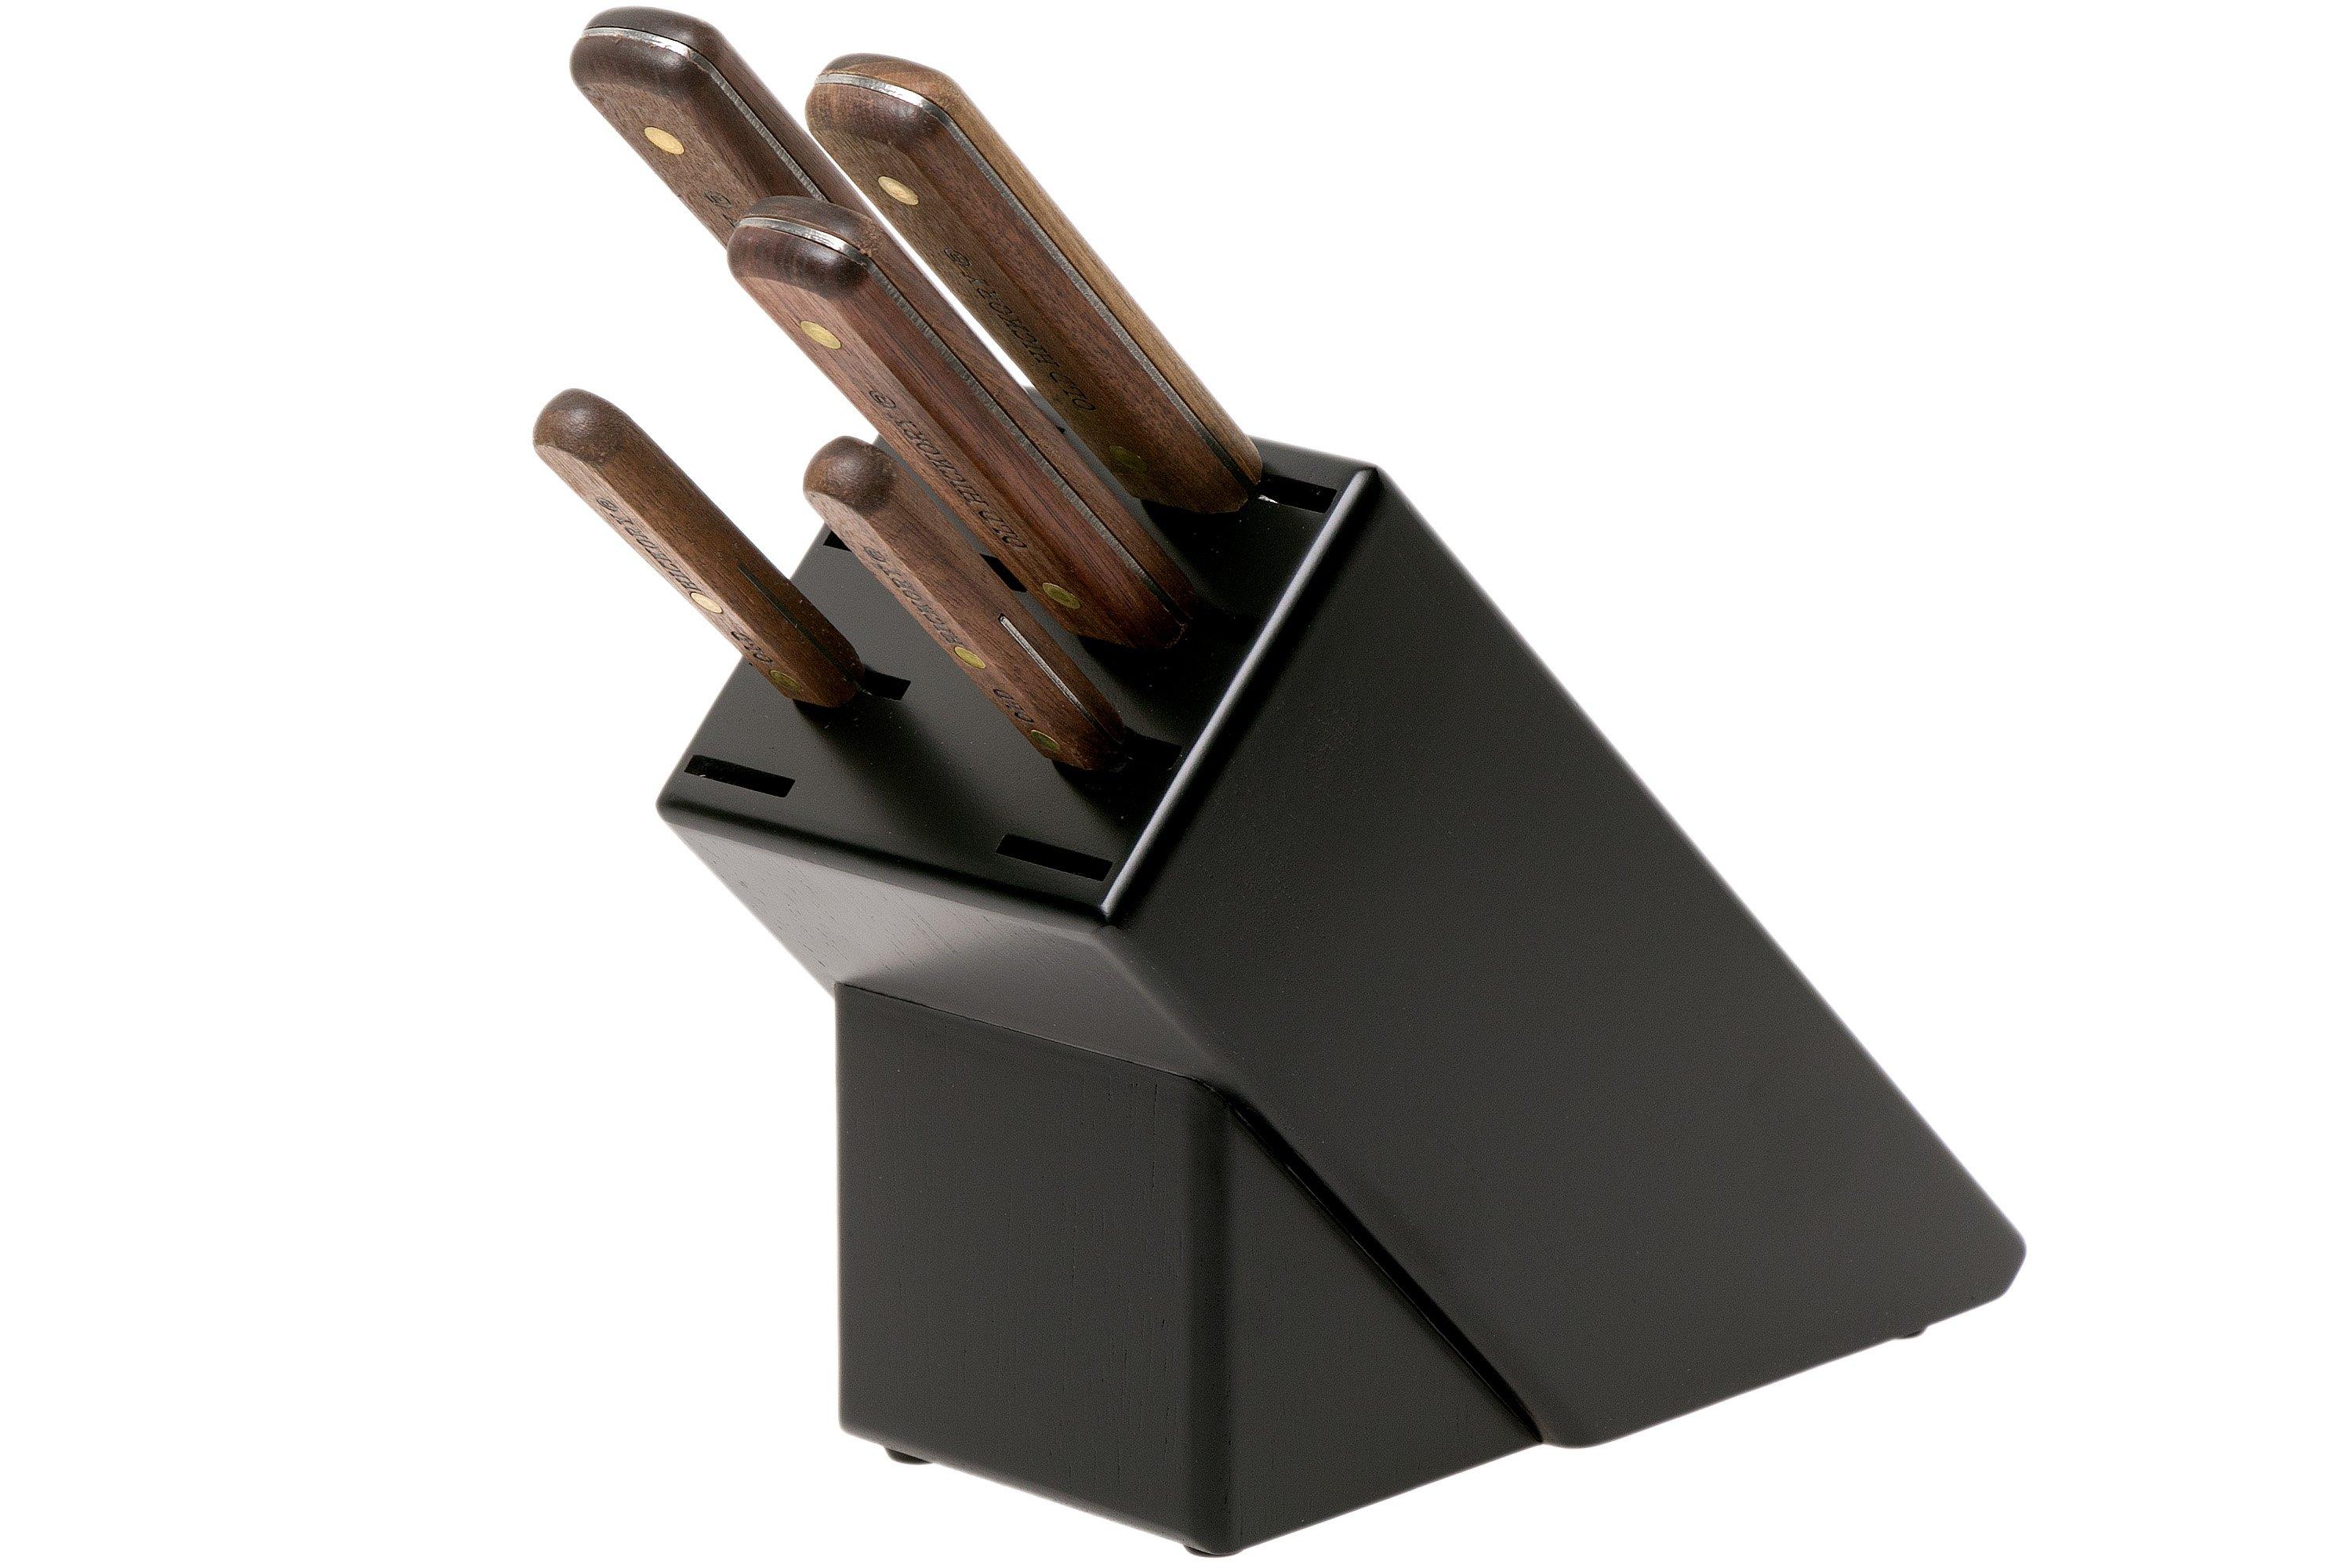 Ontario Old Hickory 5-piece knife set, 7180  Advantageously shopping at